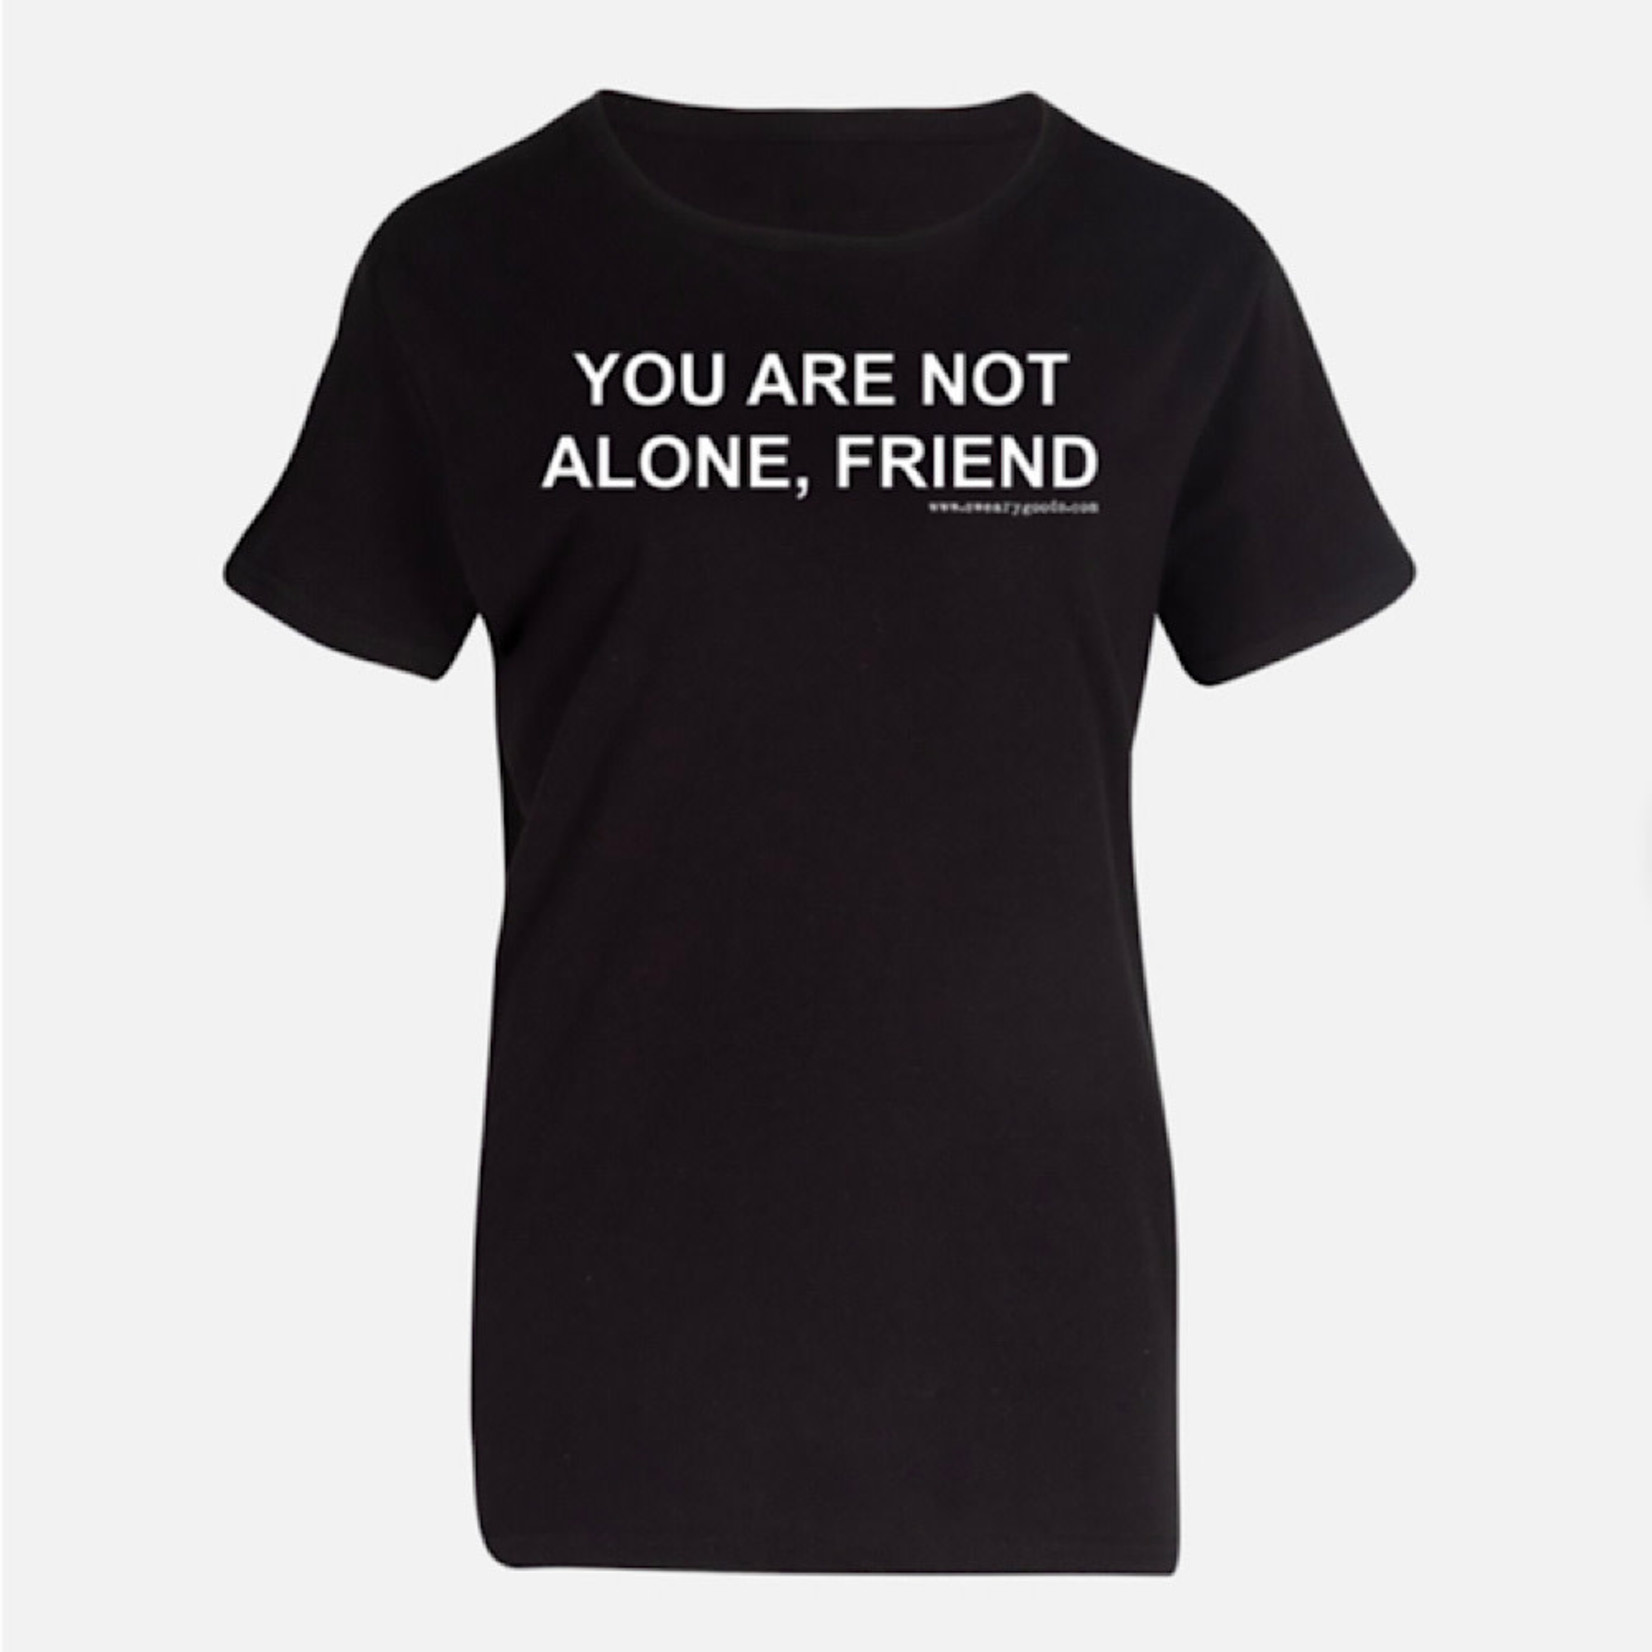 Bad Annie’s T-Shirt - You Are Not Alone, Friend